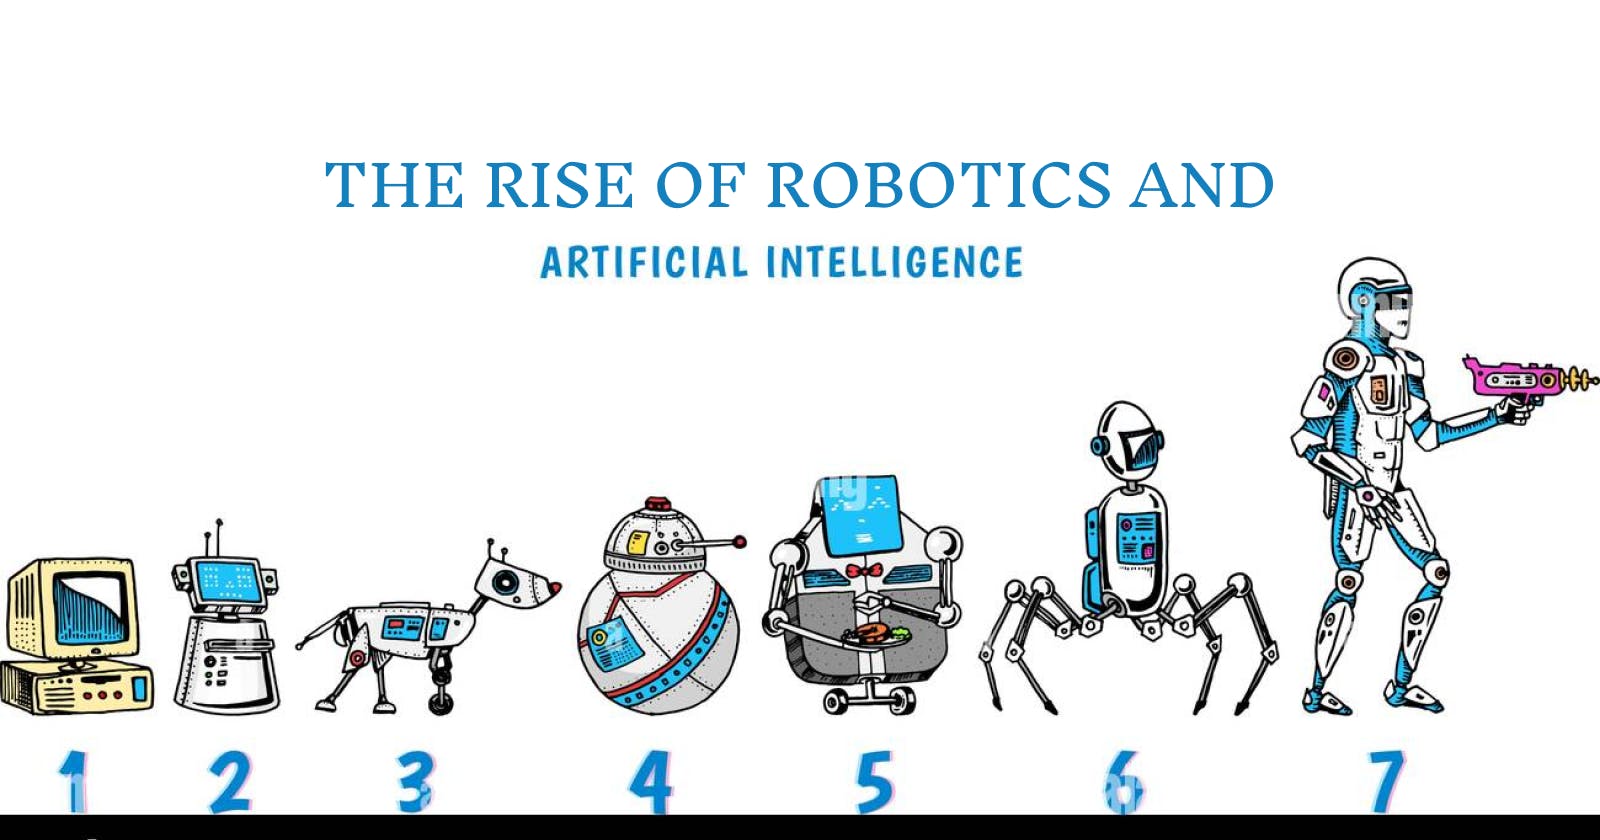 The Rise of Robotics and Artificial Intelligence